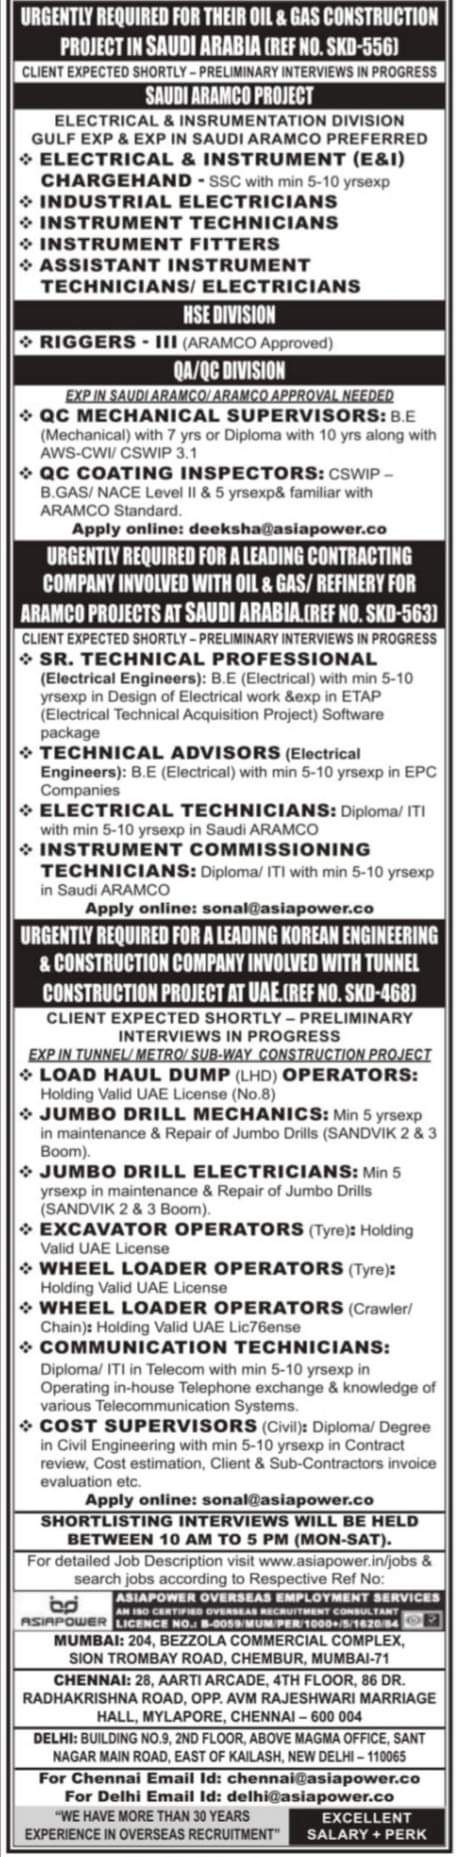 ASIA POWER GULF JOBS FOR INDIANS